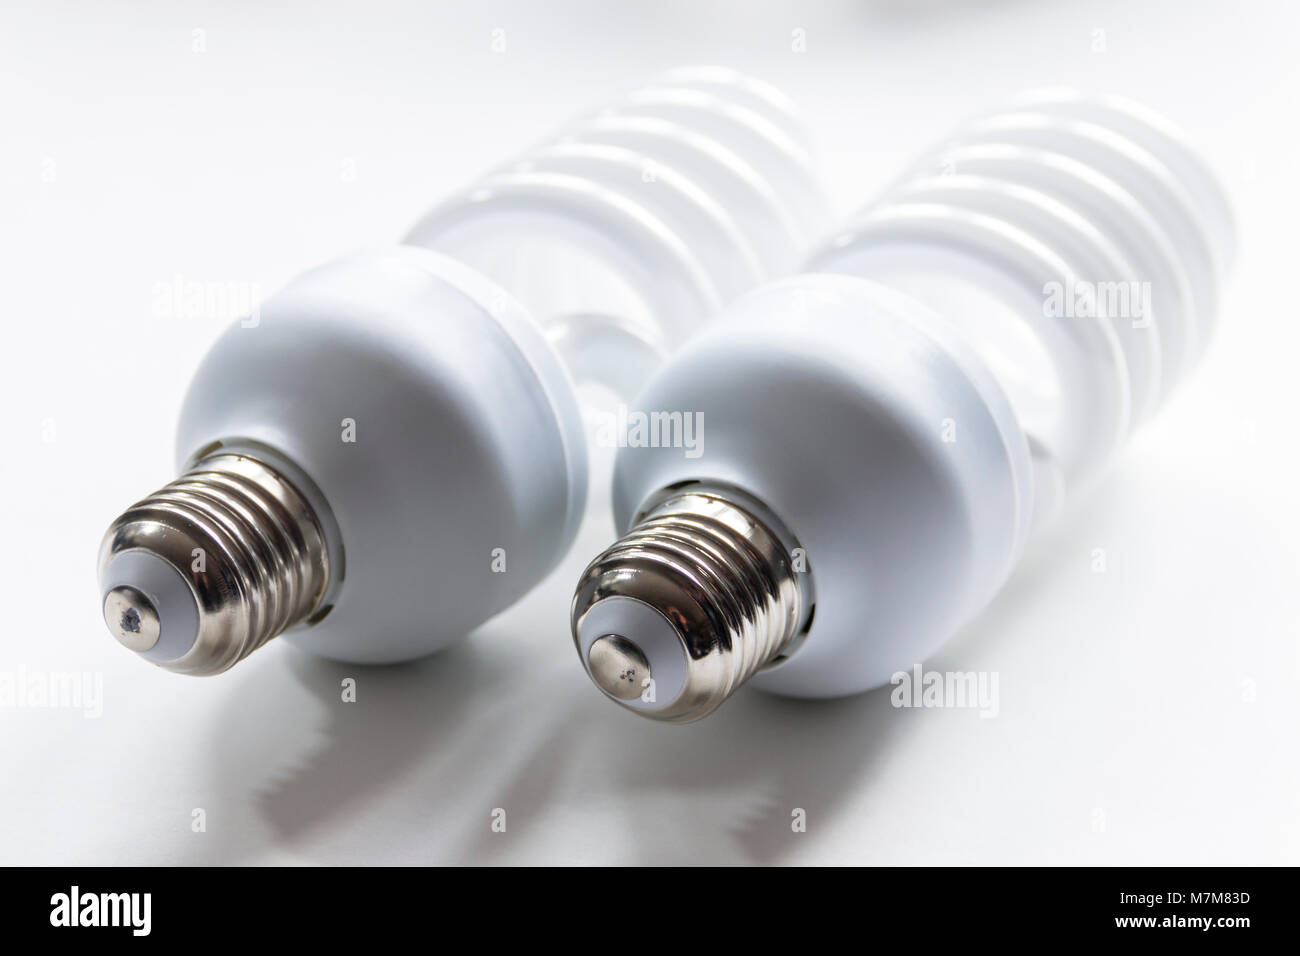 Two energy efficient high power fluorescent photographic light bulbs on a white background Stock Photo